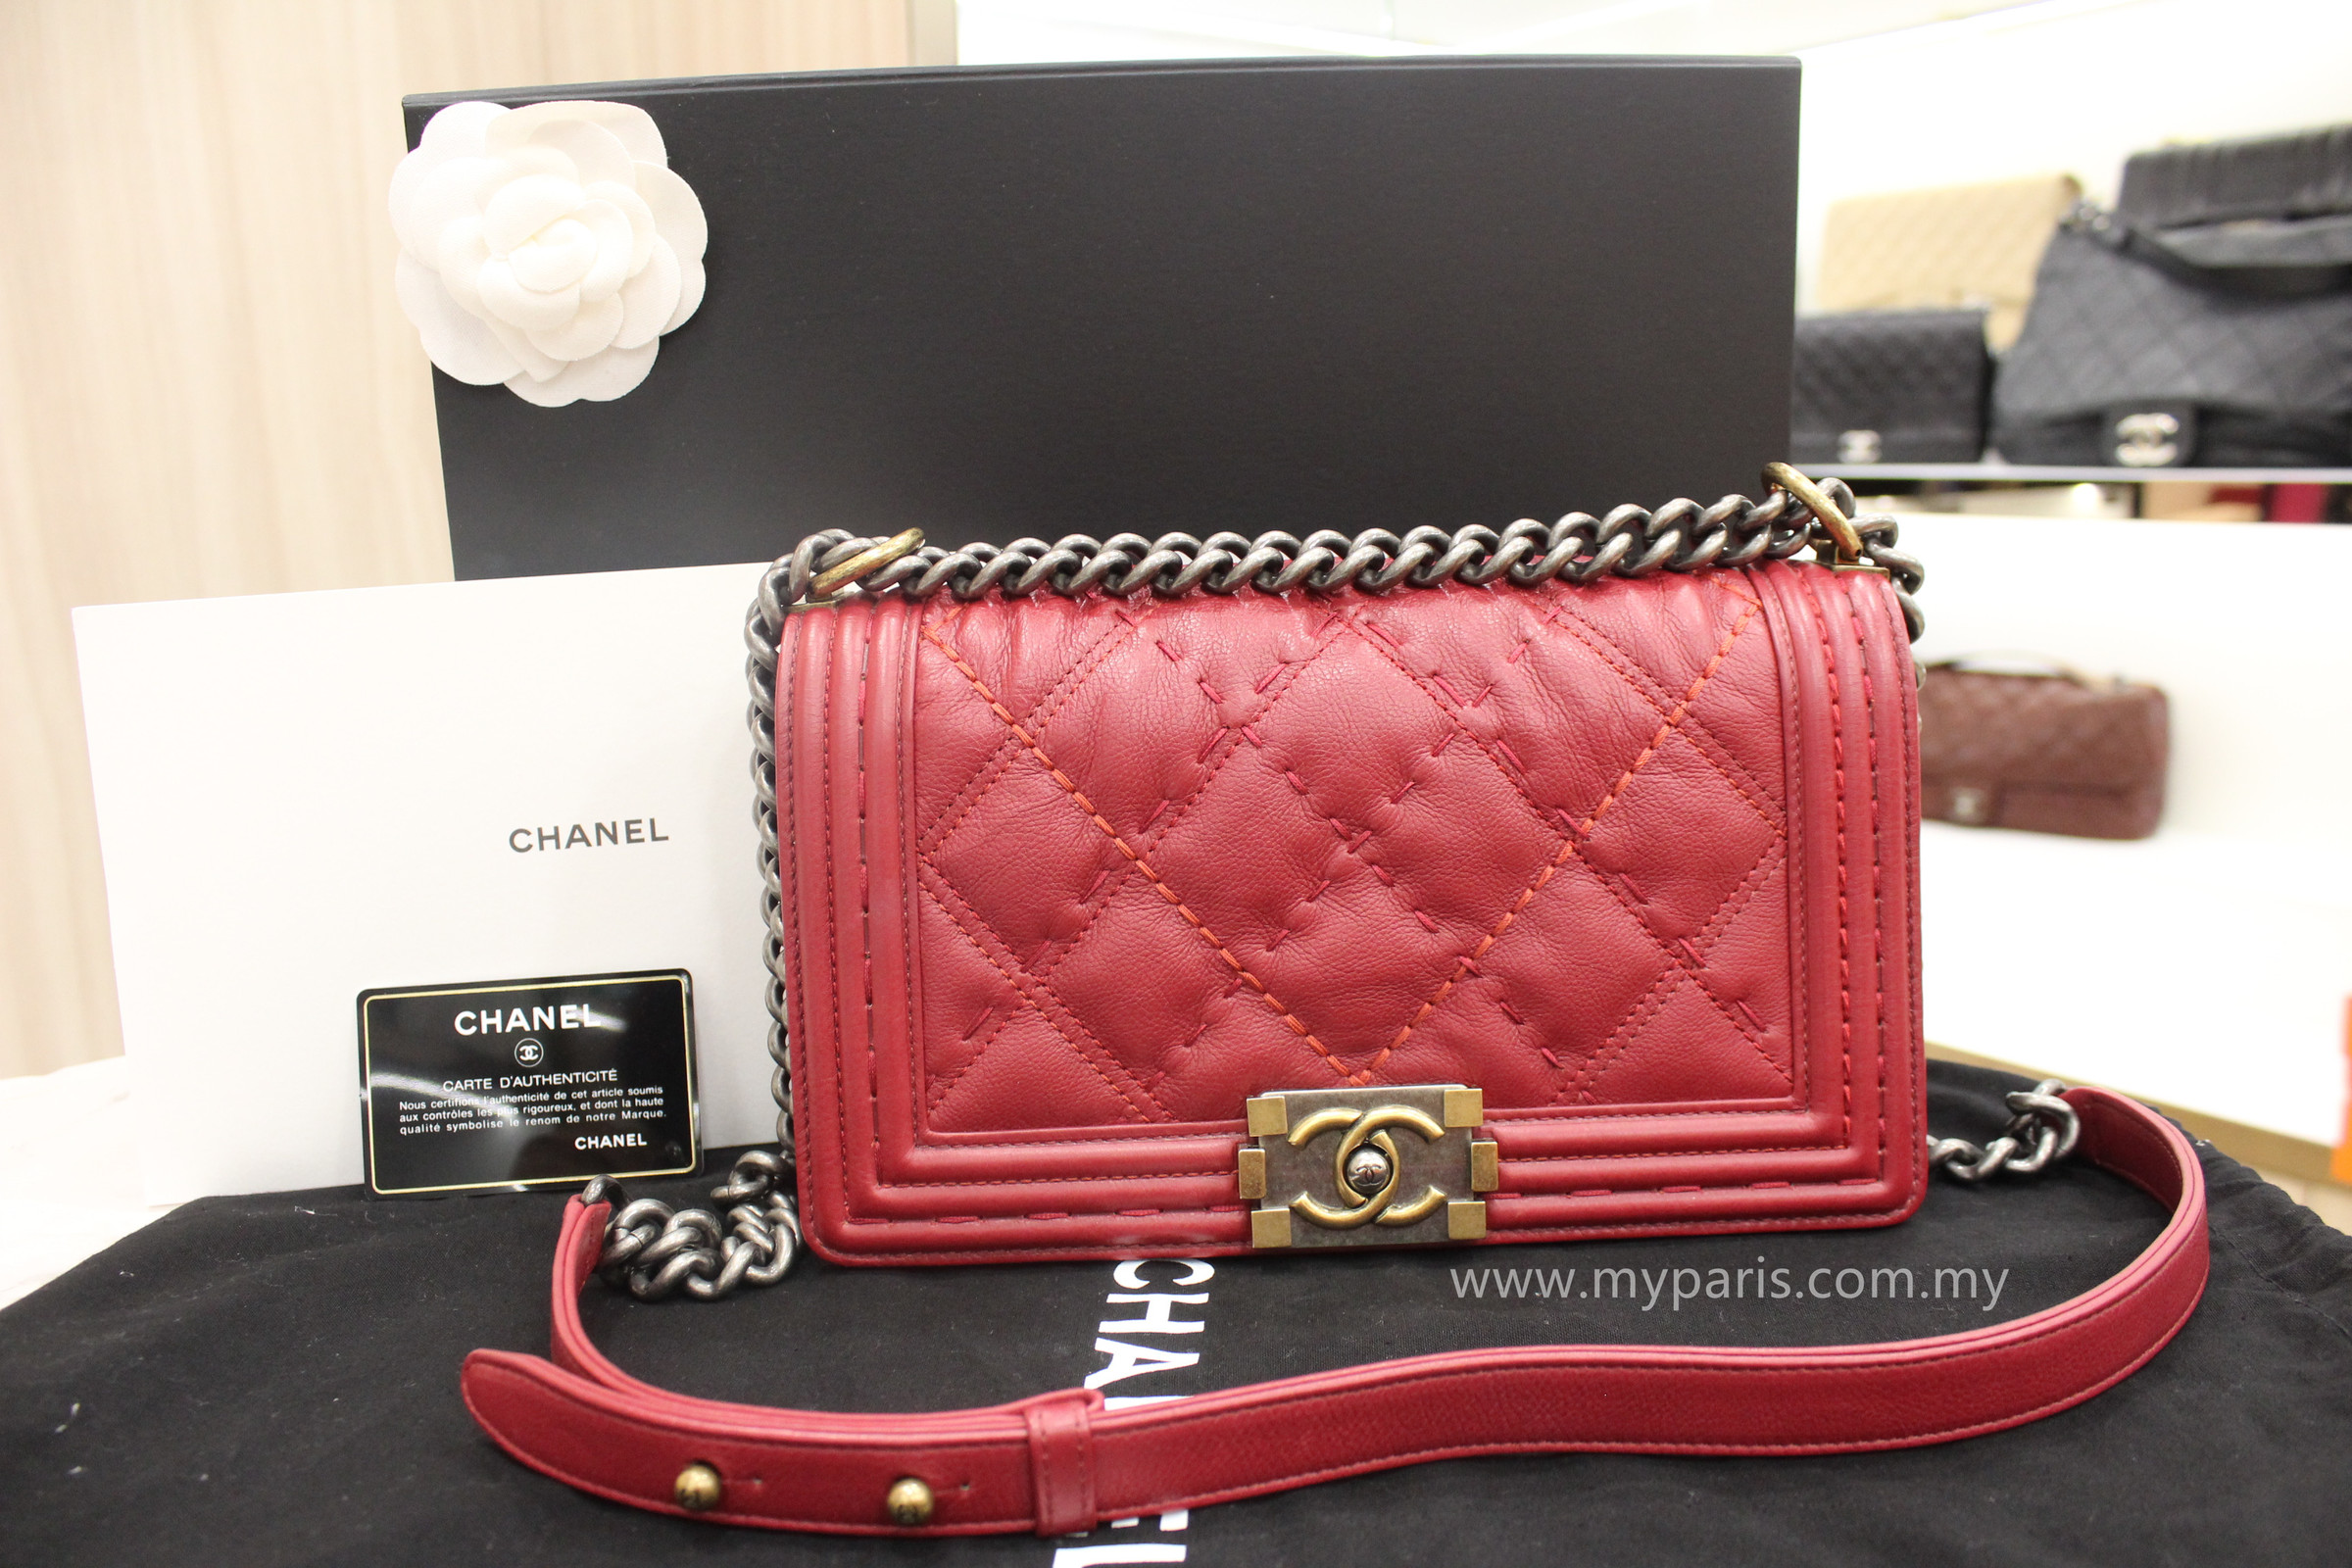 CHANEL  Bags  Soldchanel 9 Dark Red Small Size Brand New  Poshmark